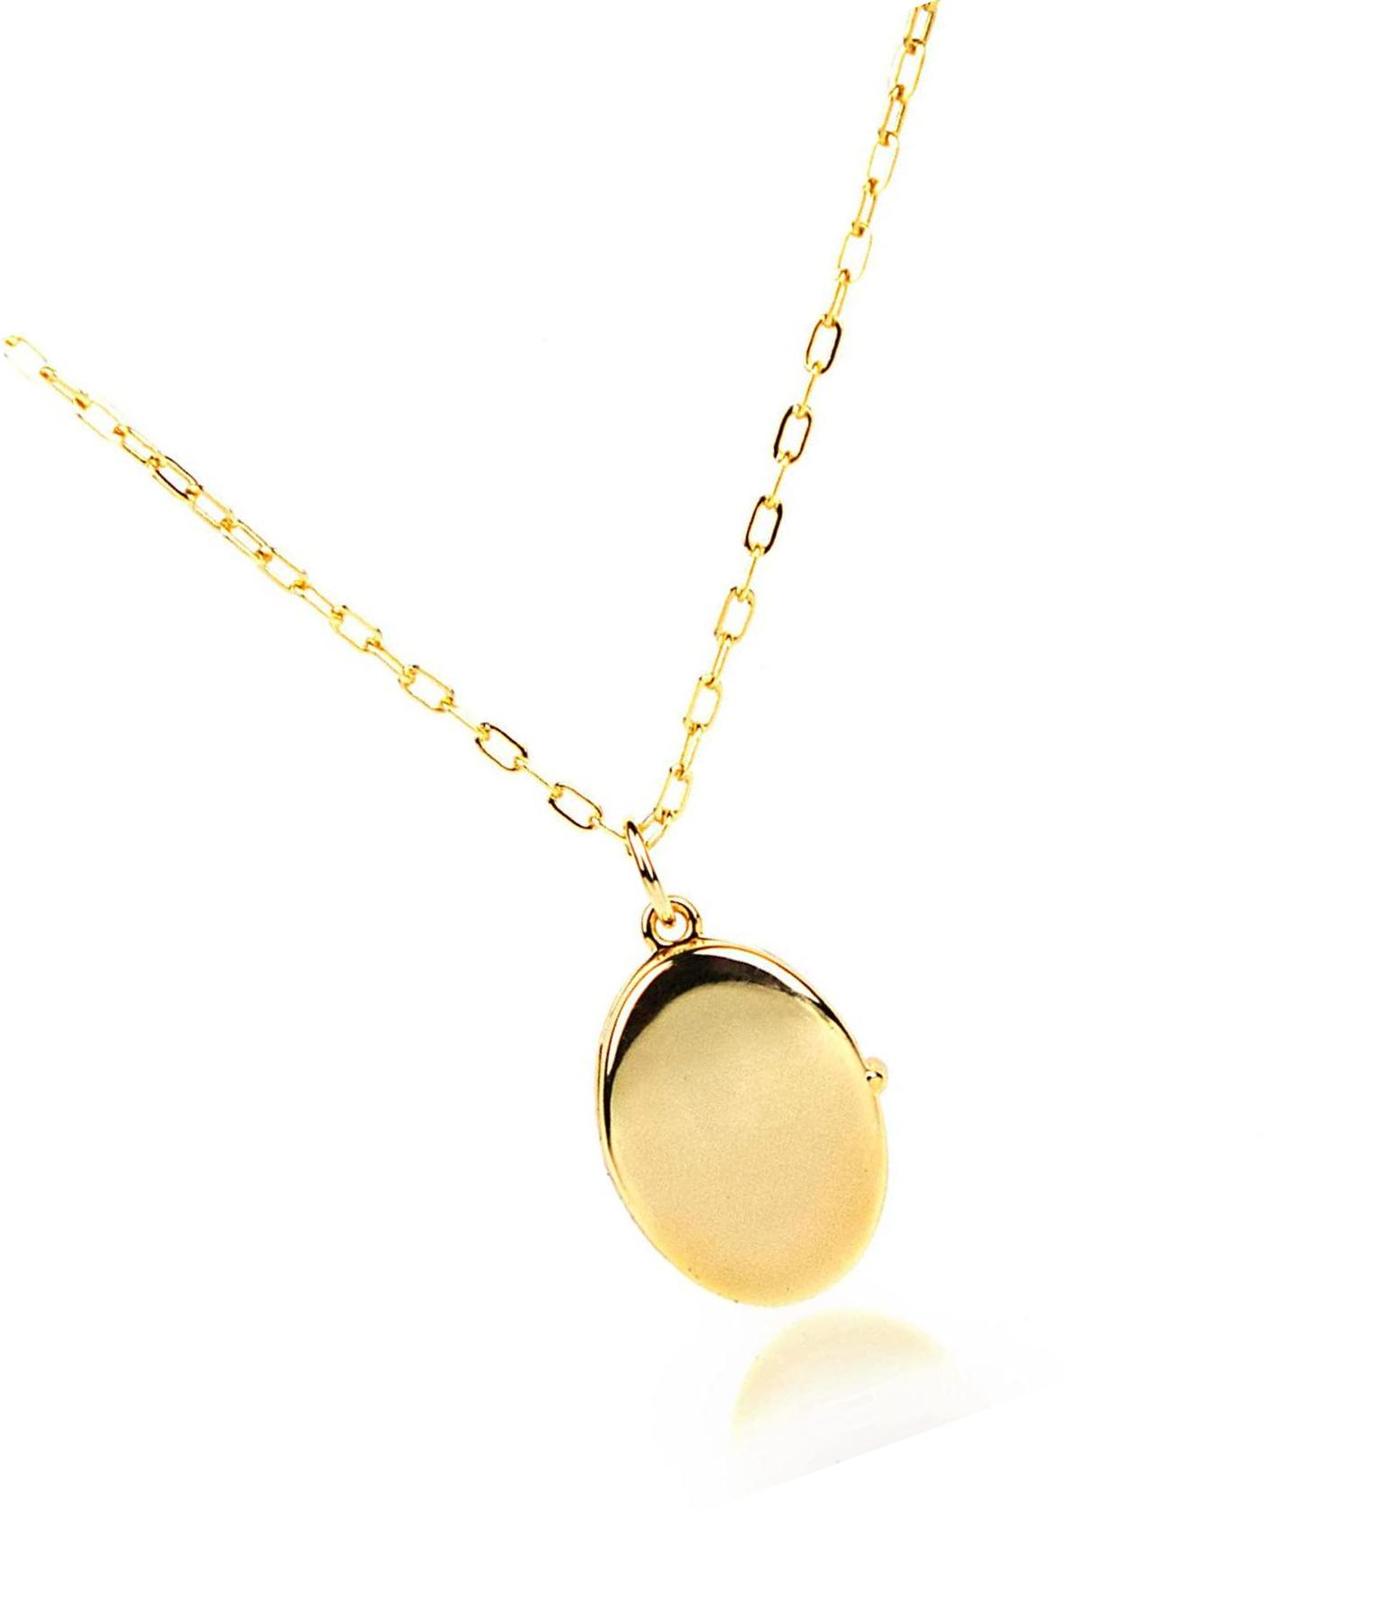 Primary image for Simply Jewelry Women's Gold Oval Locket Pendant